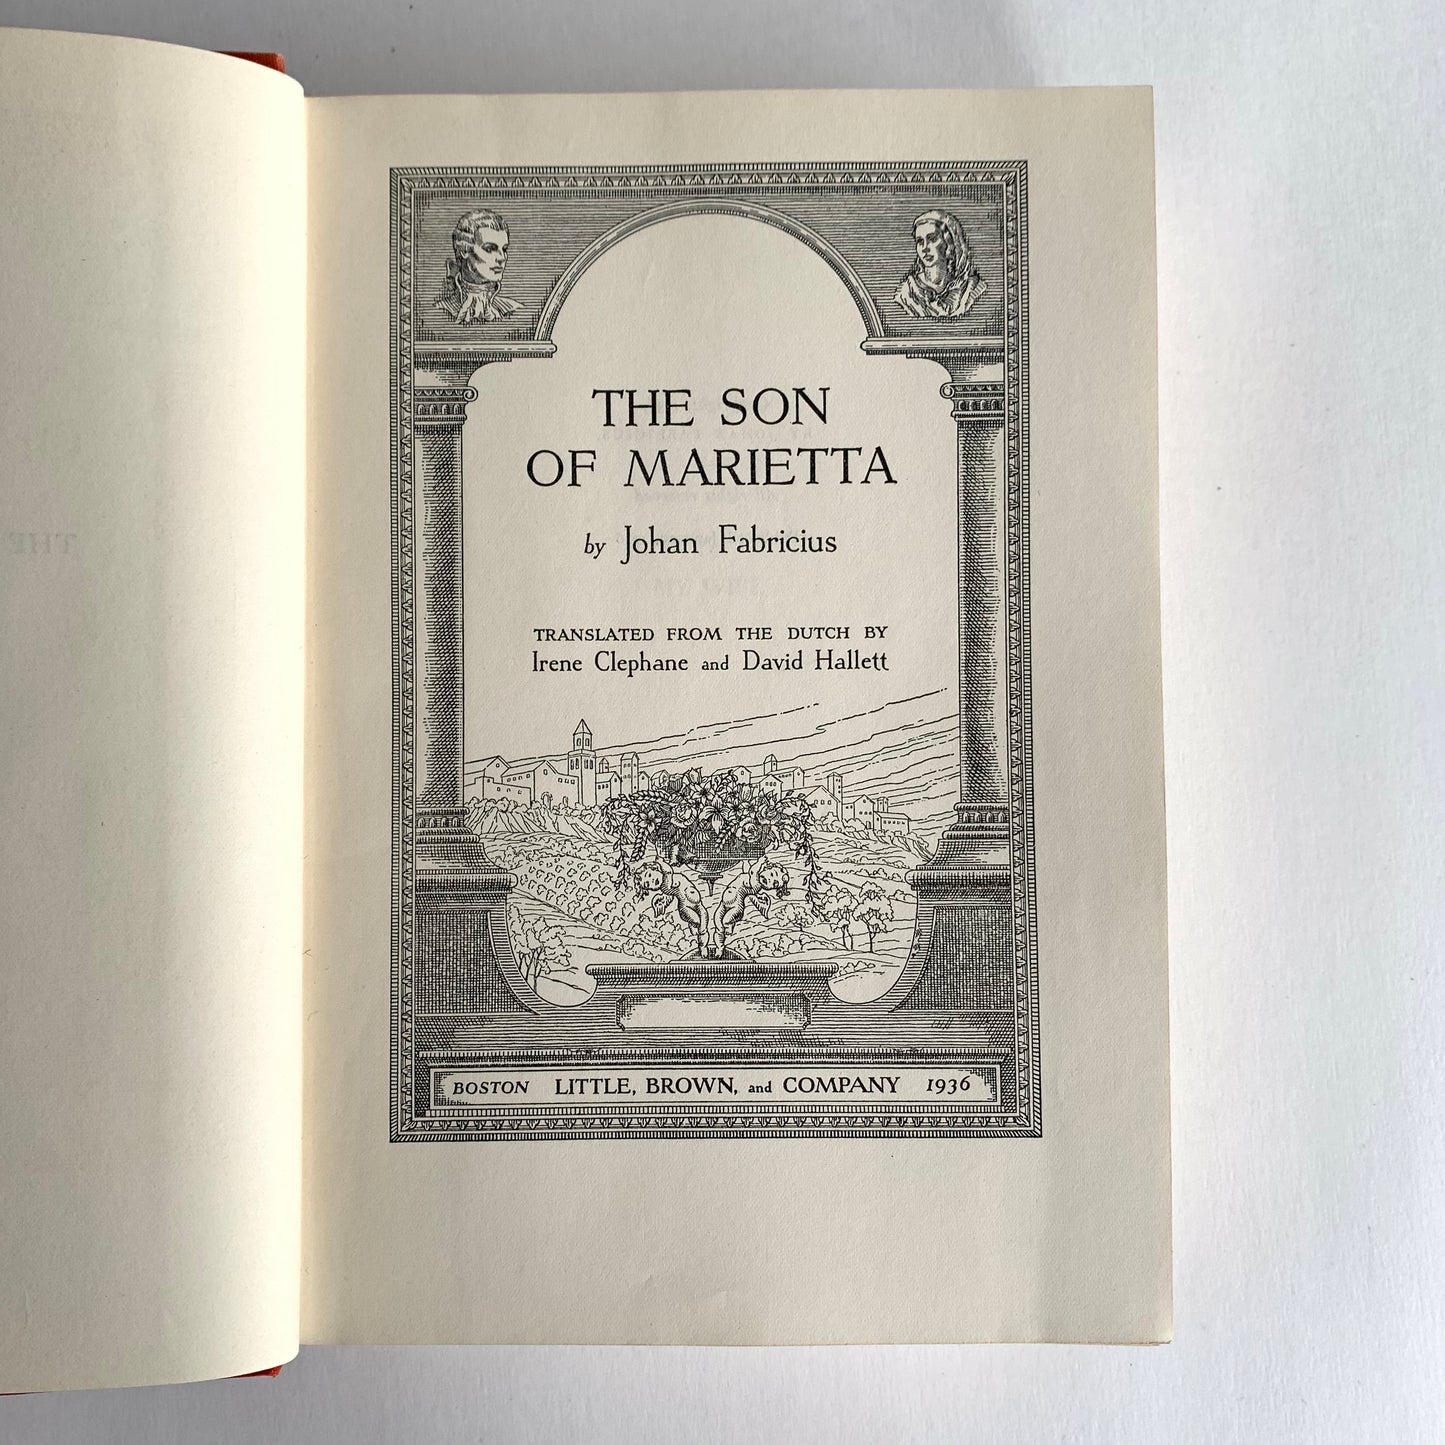 Vintage Book- The Son of Marietta by Johan Fabricius